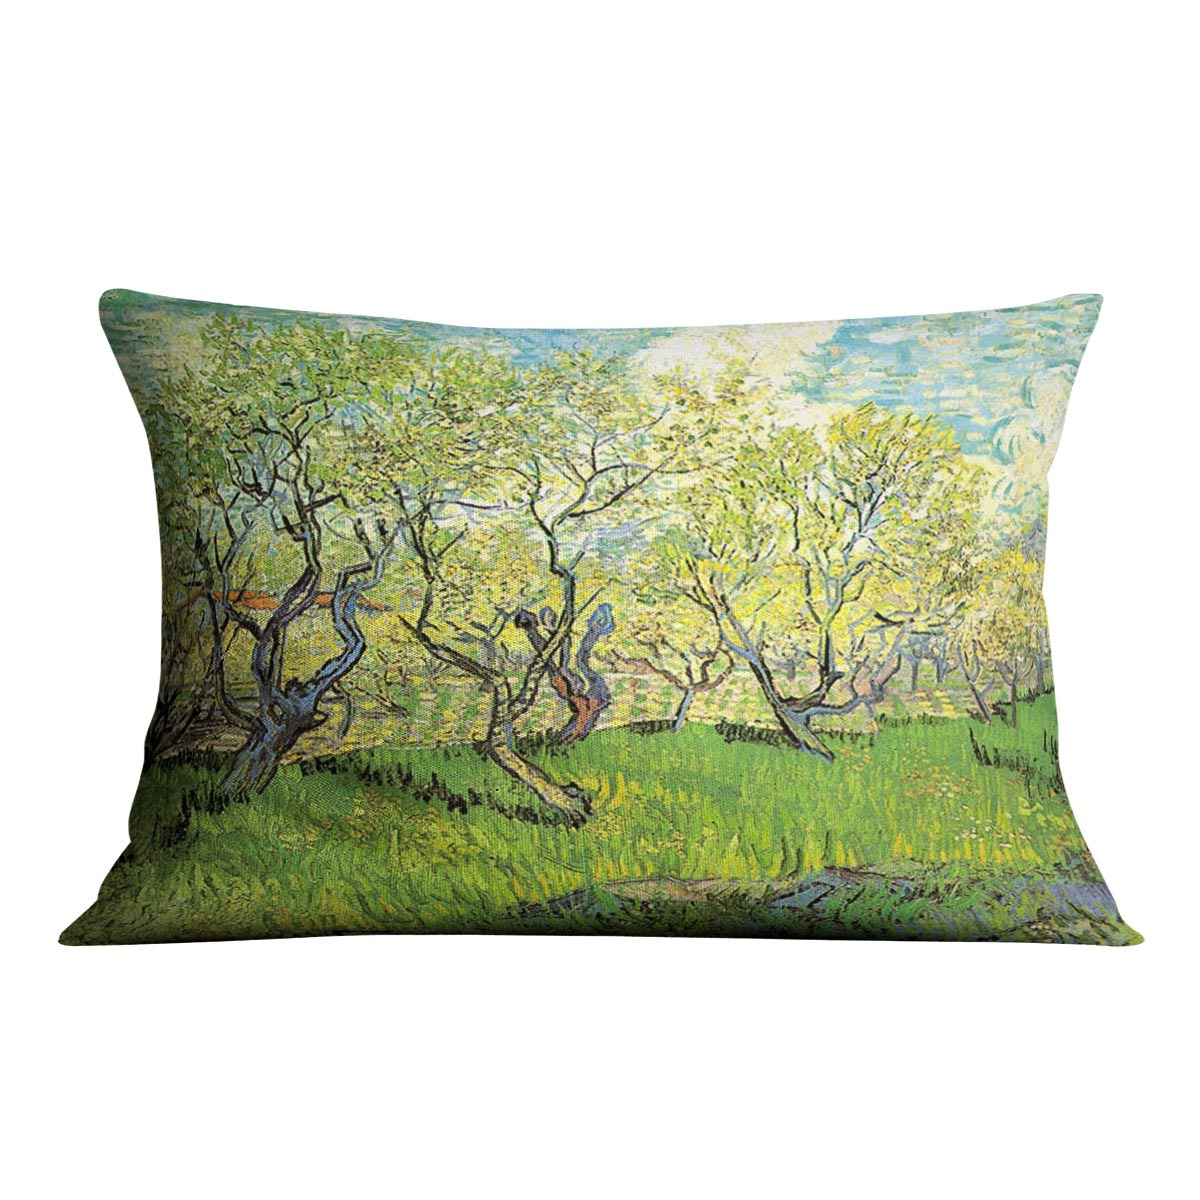 Orchard in Blossom 2 by Van Gogh Cushion